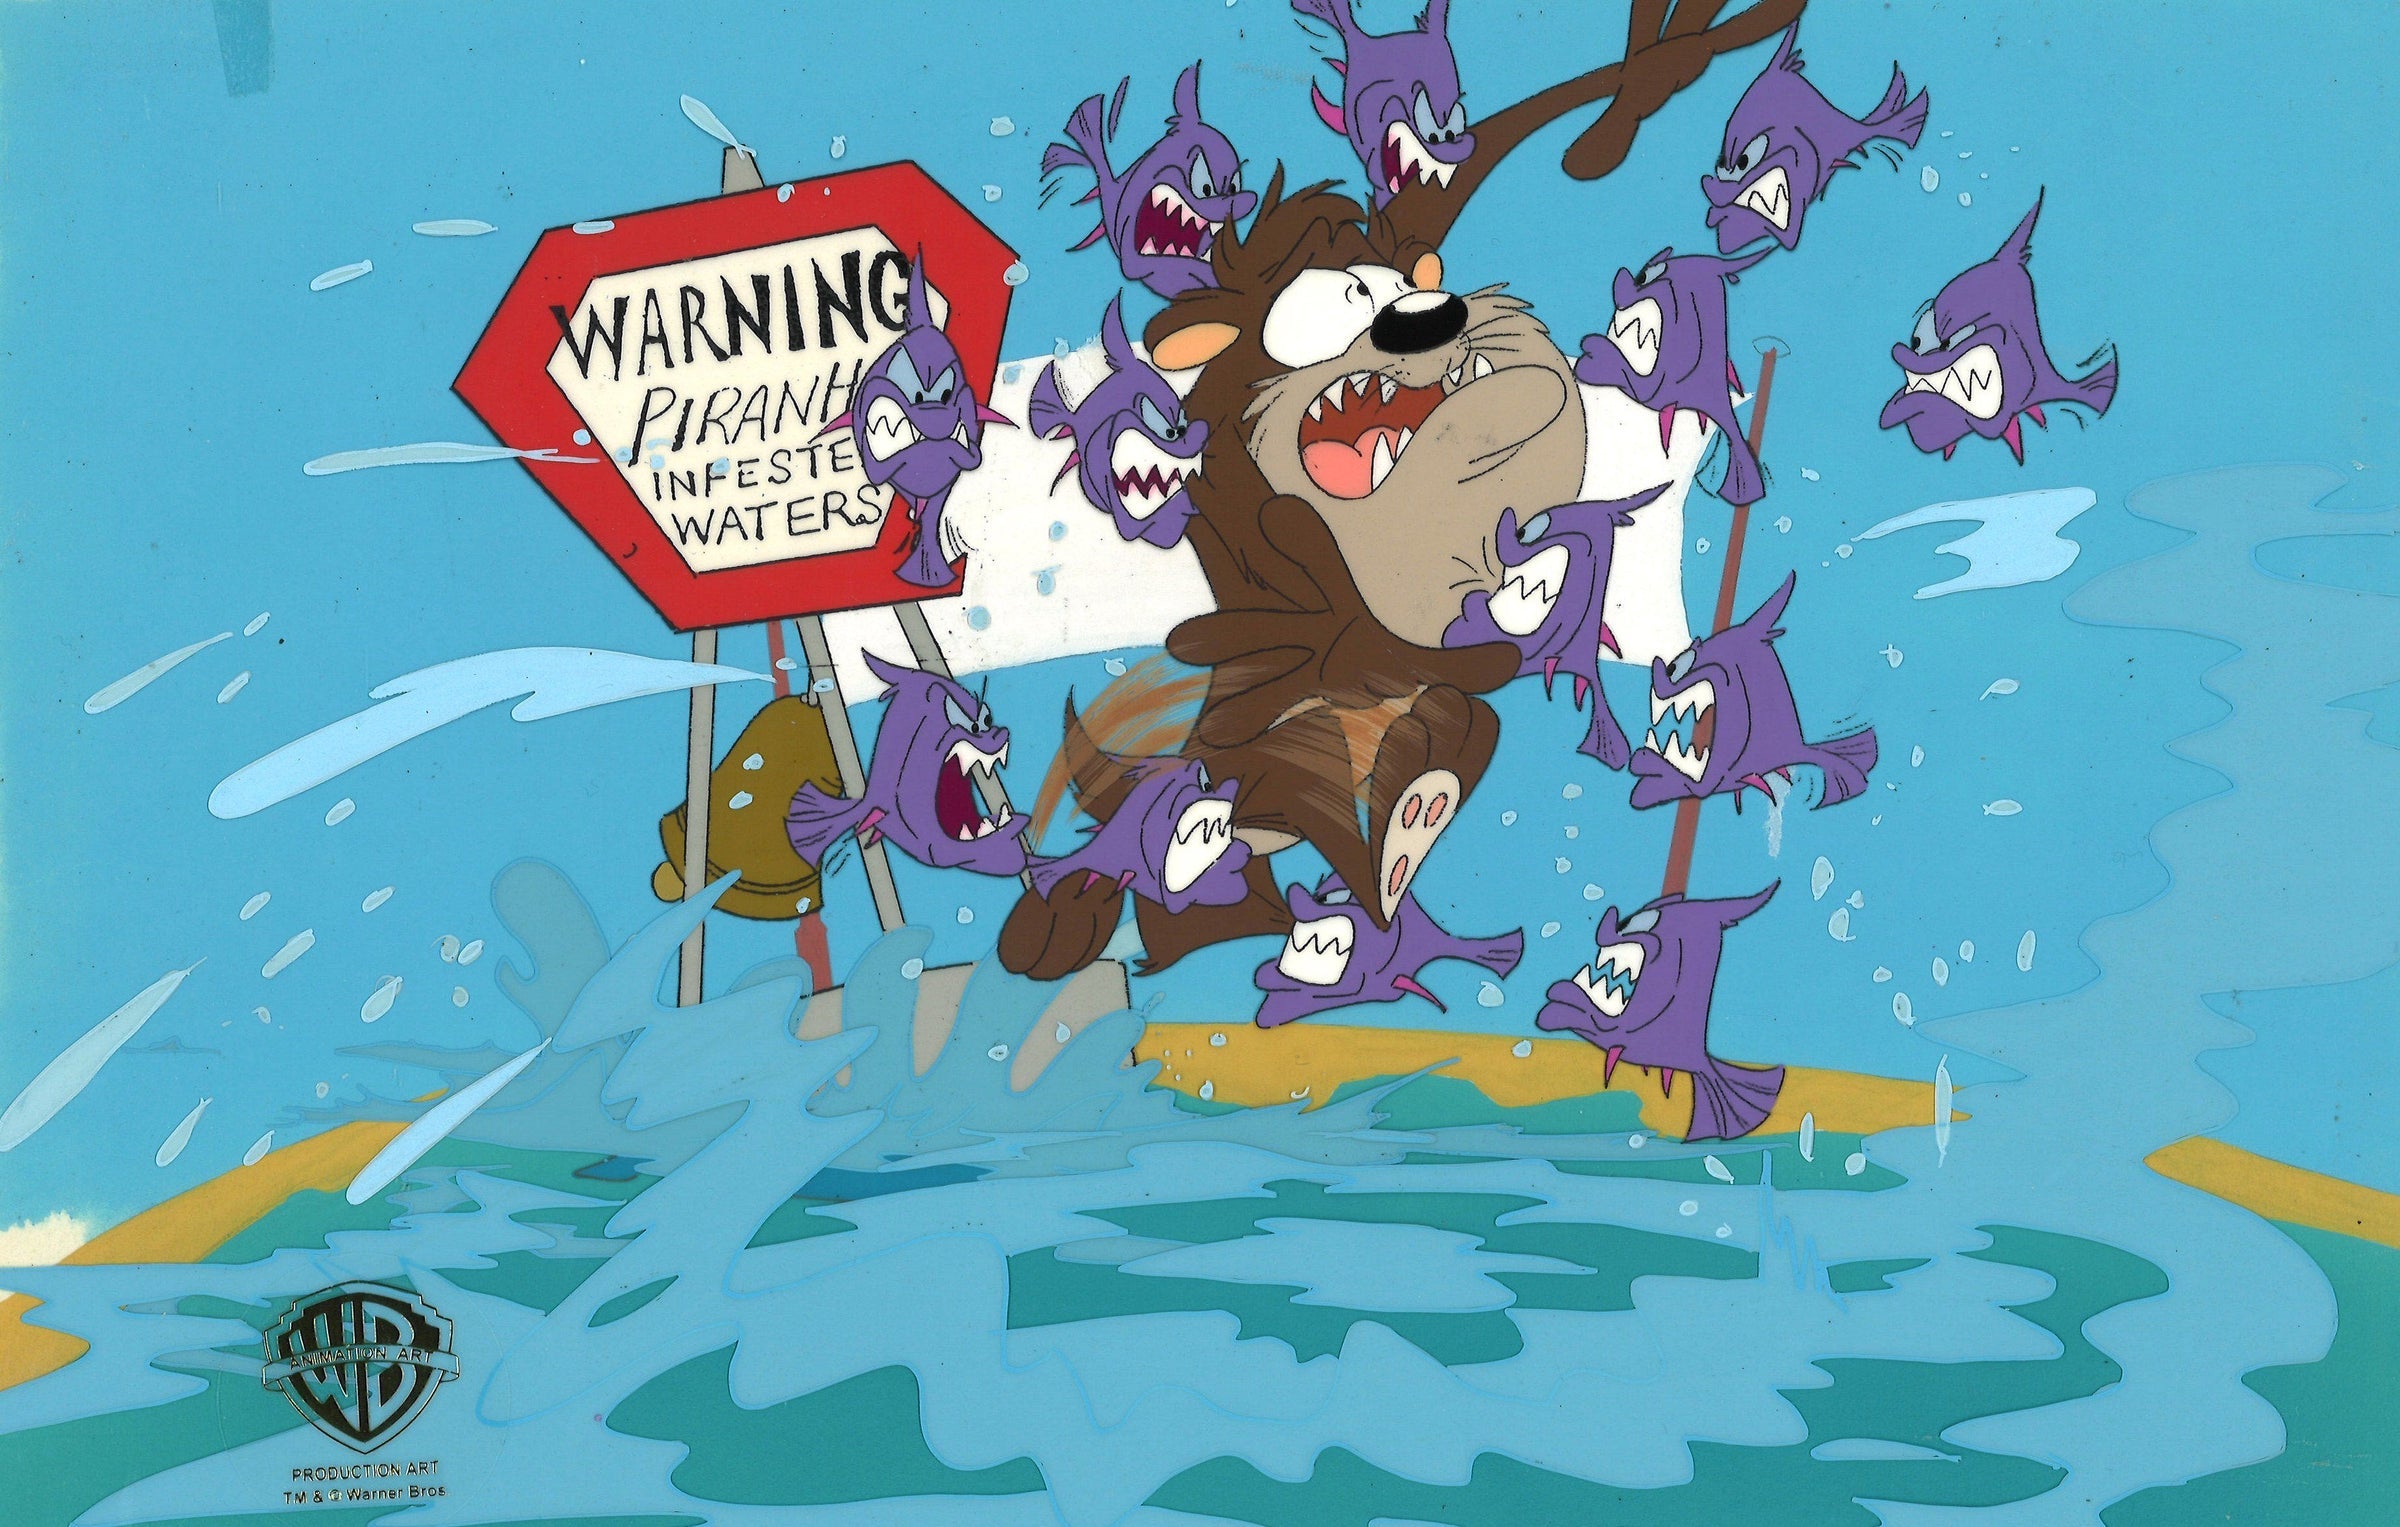 Ignoring the "Warning" sign puts Taz is in deep water - surrounded by a spool of hungry piranhas.